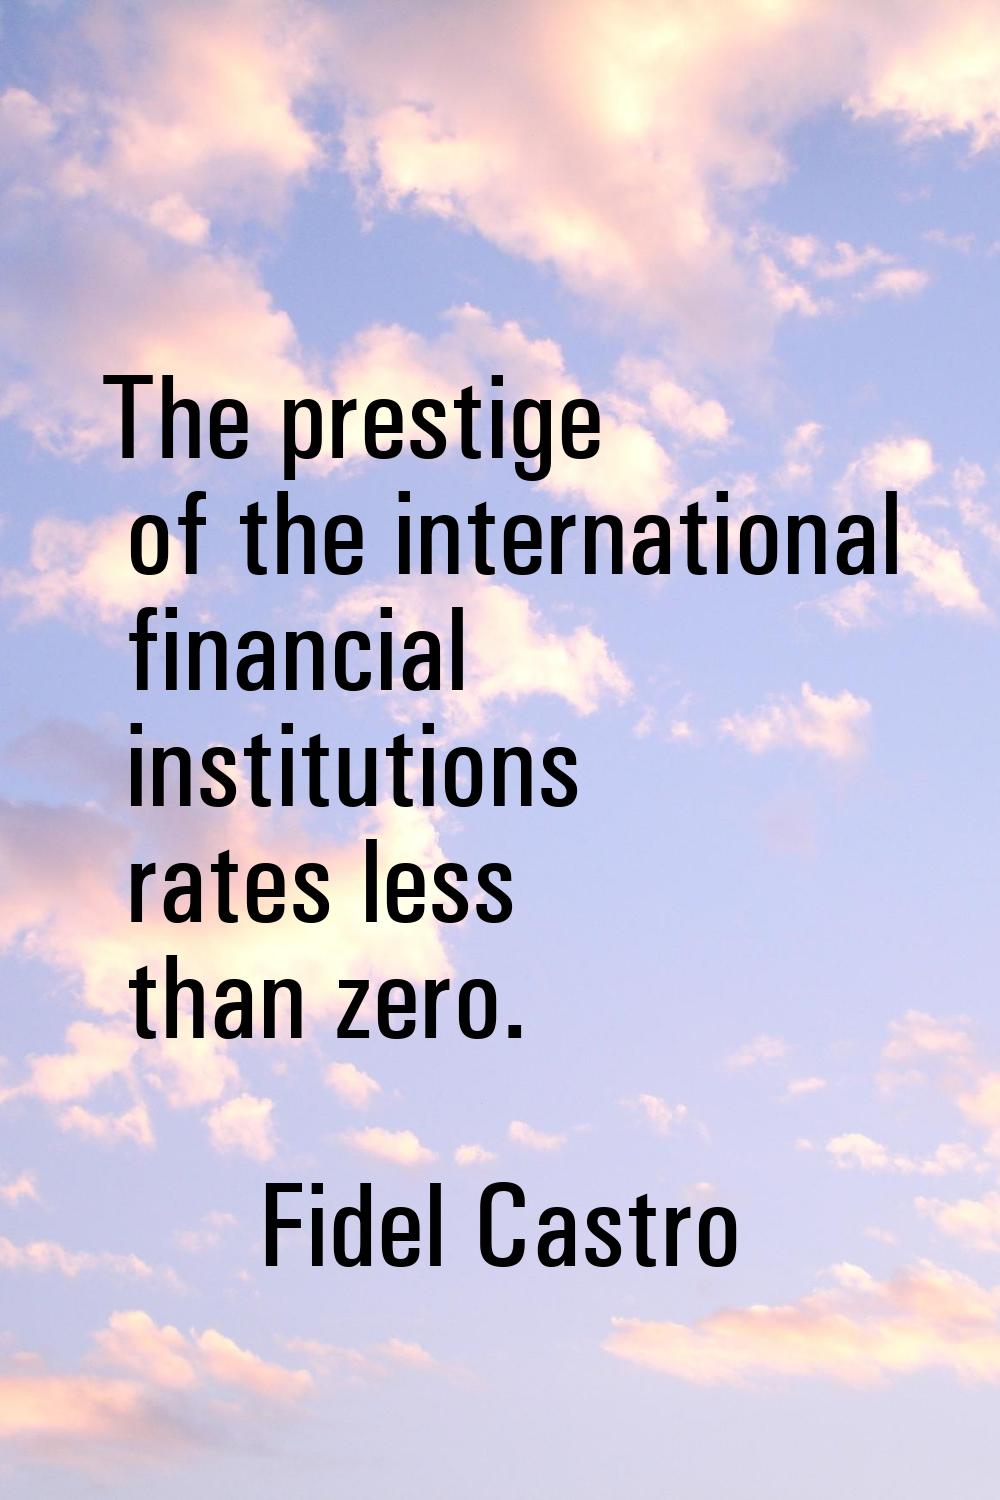 The prestige of the international financial institutions rates less than zero.